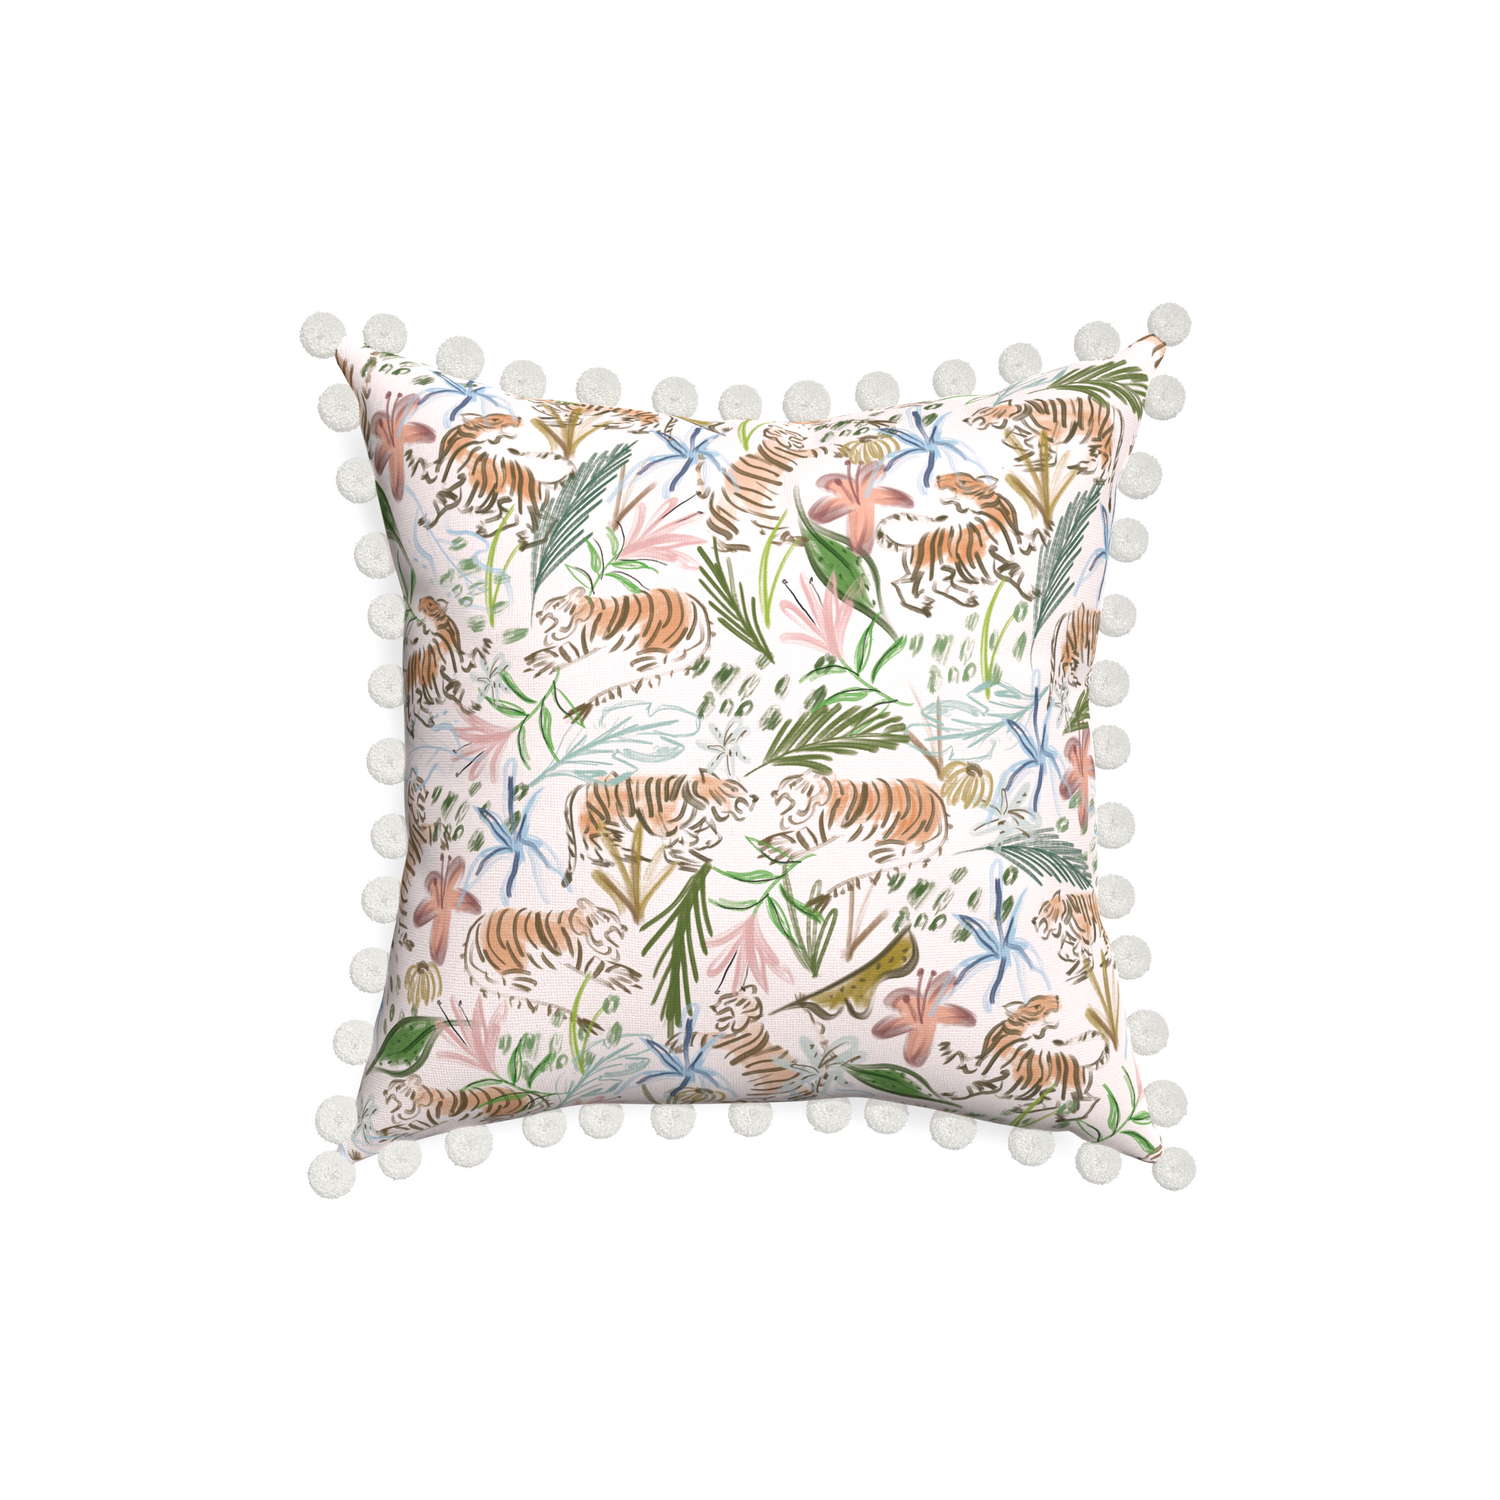 18-square frida pink custom pink chinoiserie tigerpillow with snow pom pom on white background